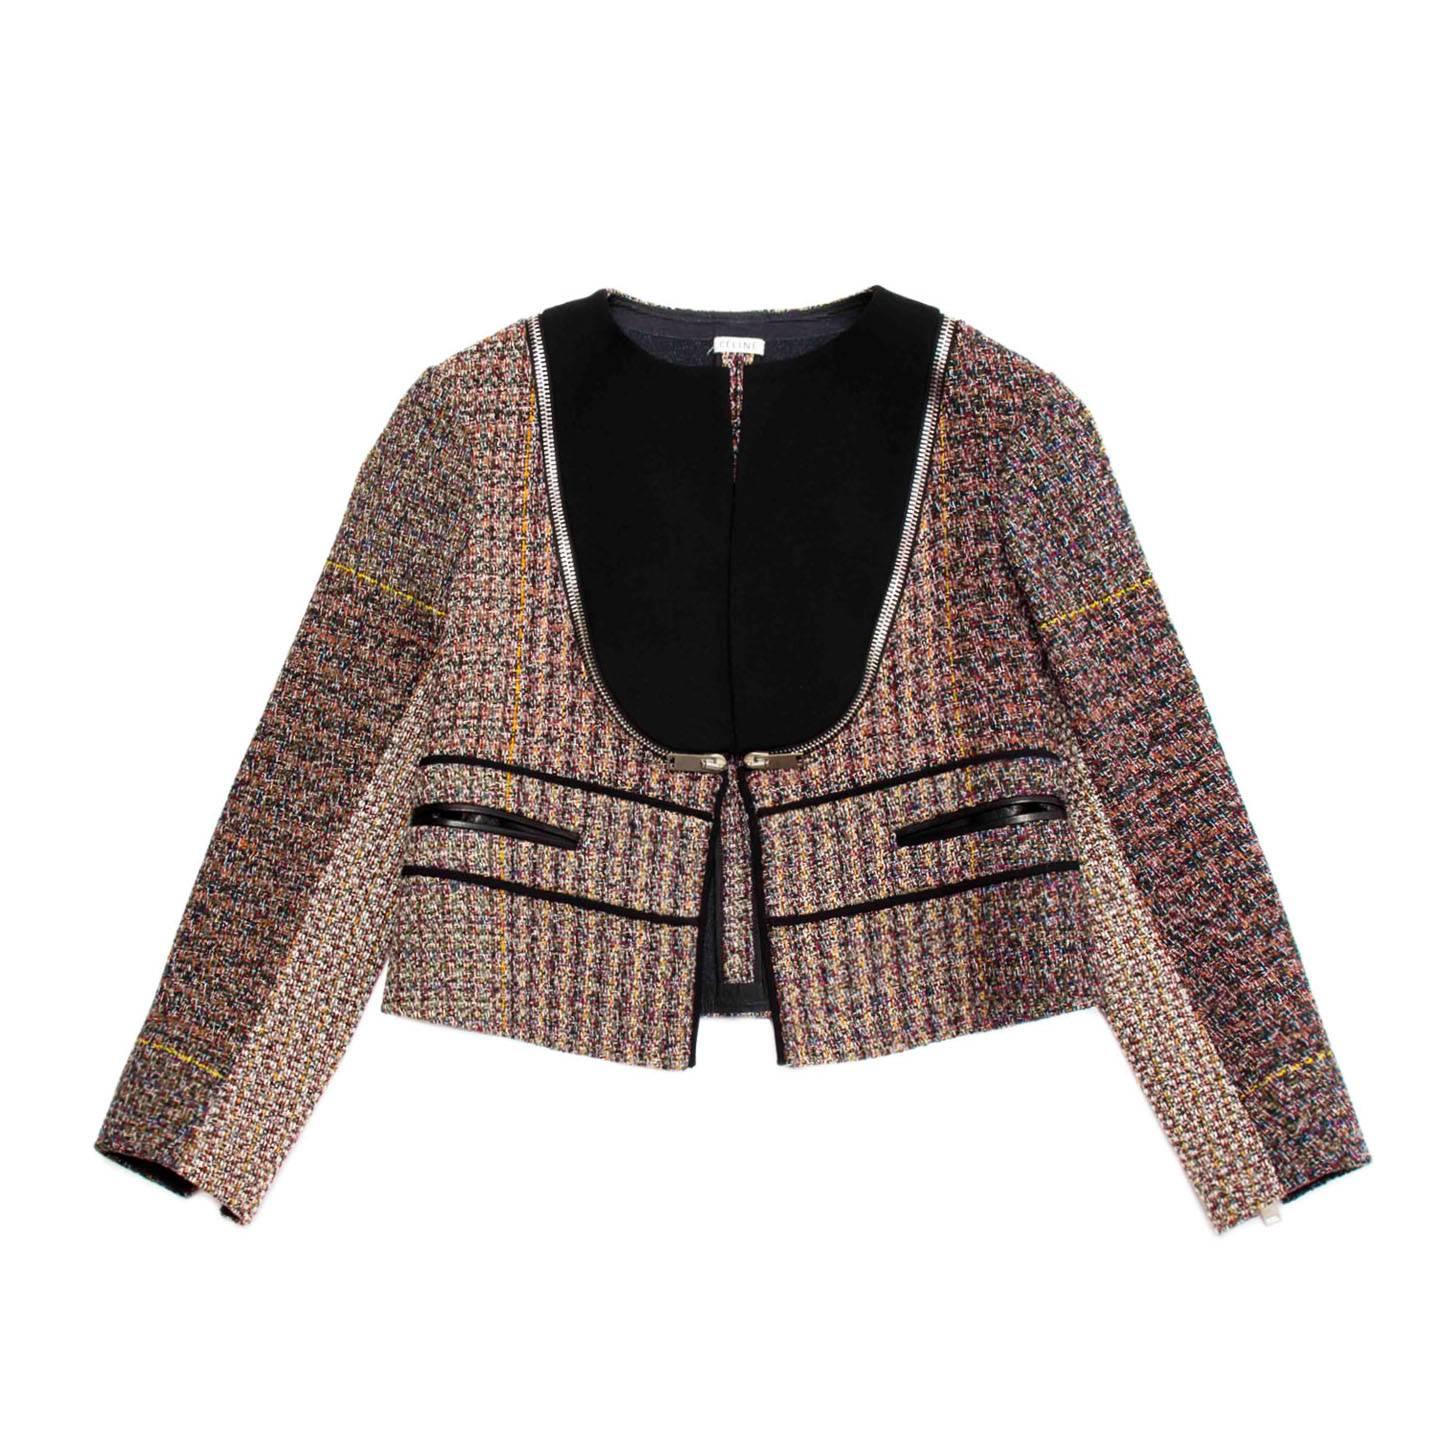 Multicolor tweed wool cropped jacket with open front and black bib detail. Silver metal zippers enrich the sleeves and the bib profile to continue towards the back on the whole length of the darts. A black piping highlights the waistband at front